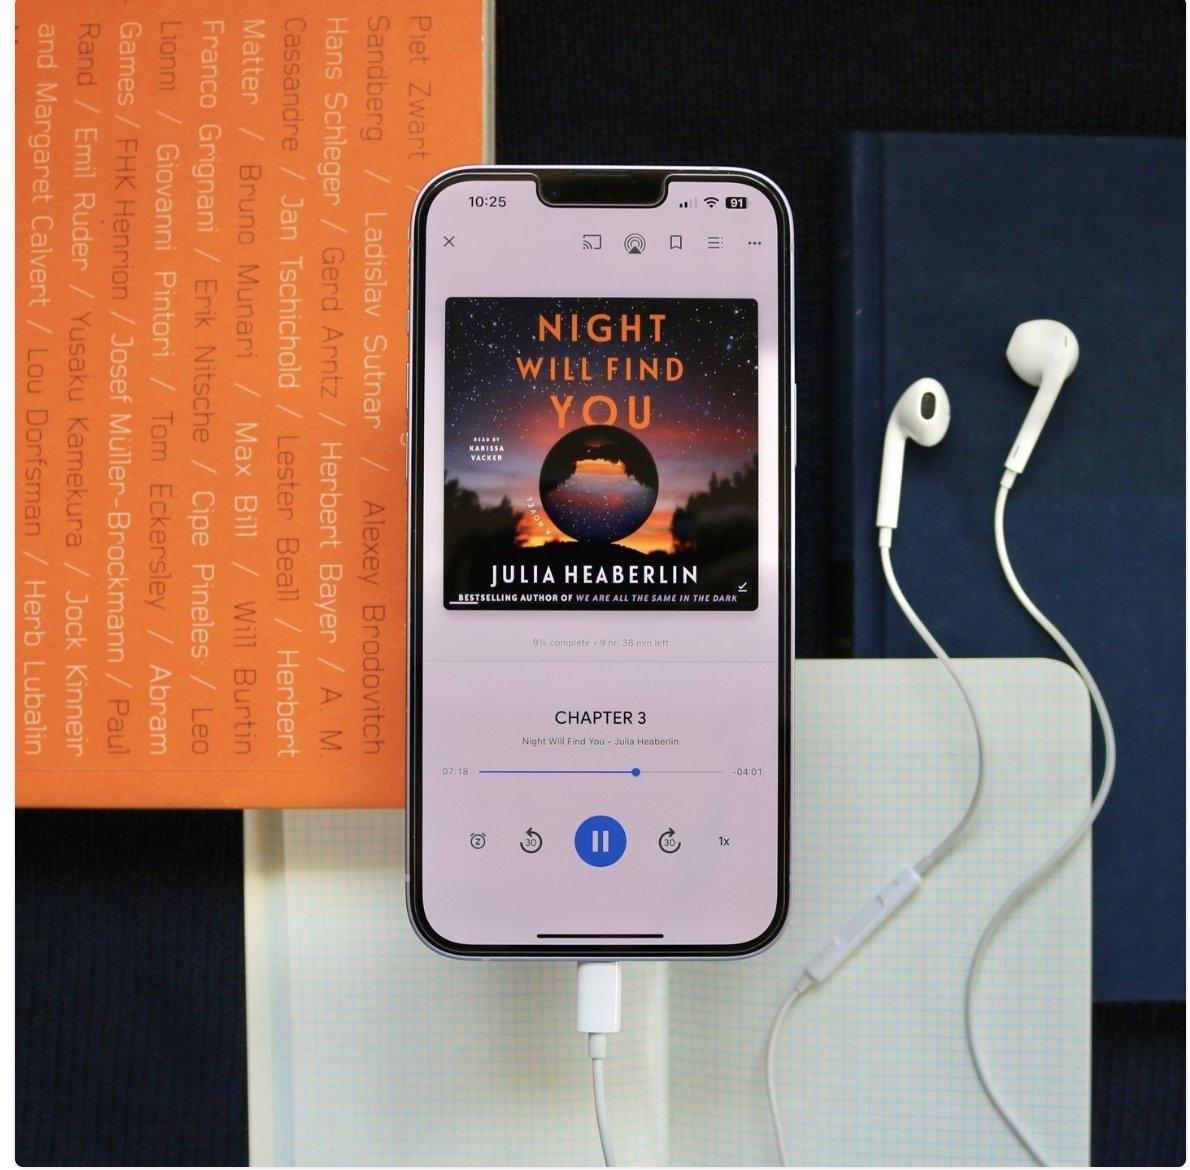 Read or listen... DO NOT MISS Night Will Find You by @juliathrillers. “An expertly rendered mystery, complete with compelling characters, an impeccably paced plot, and surprising twists. A must-read!” ―Heather Gudenkauf 📸: @Macmillan.Audio #crimefiction #audiobook